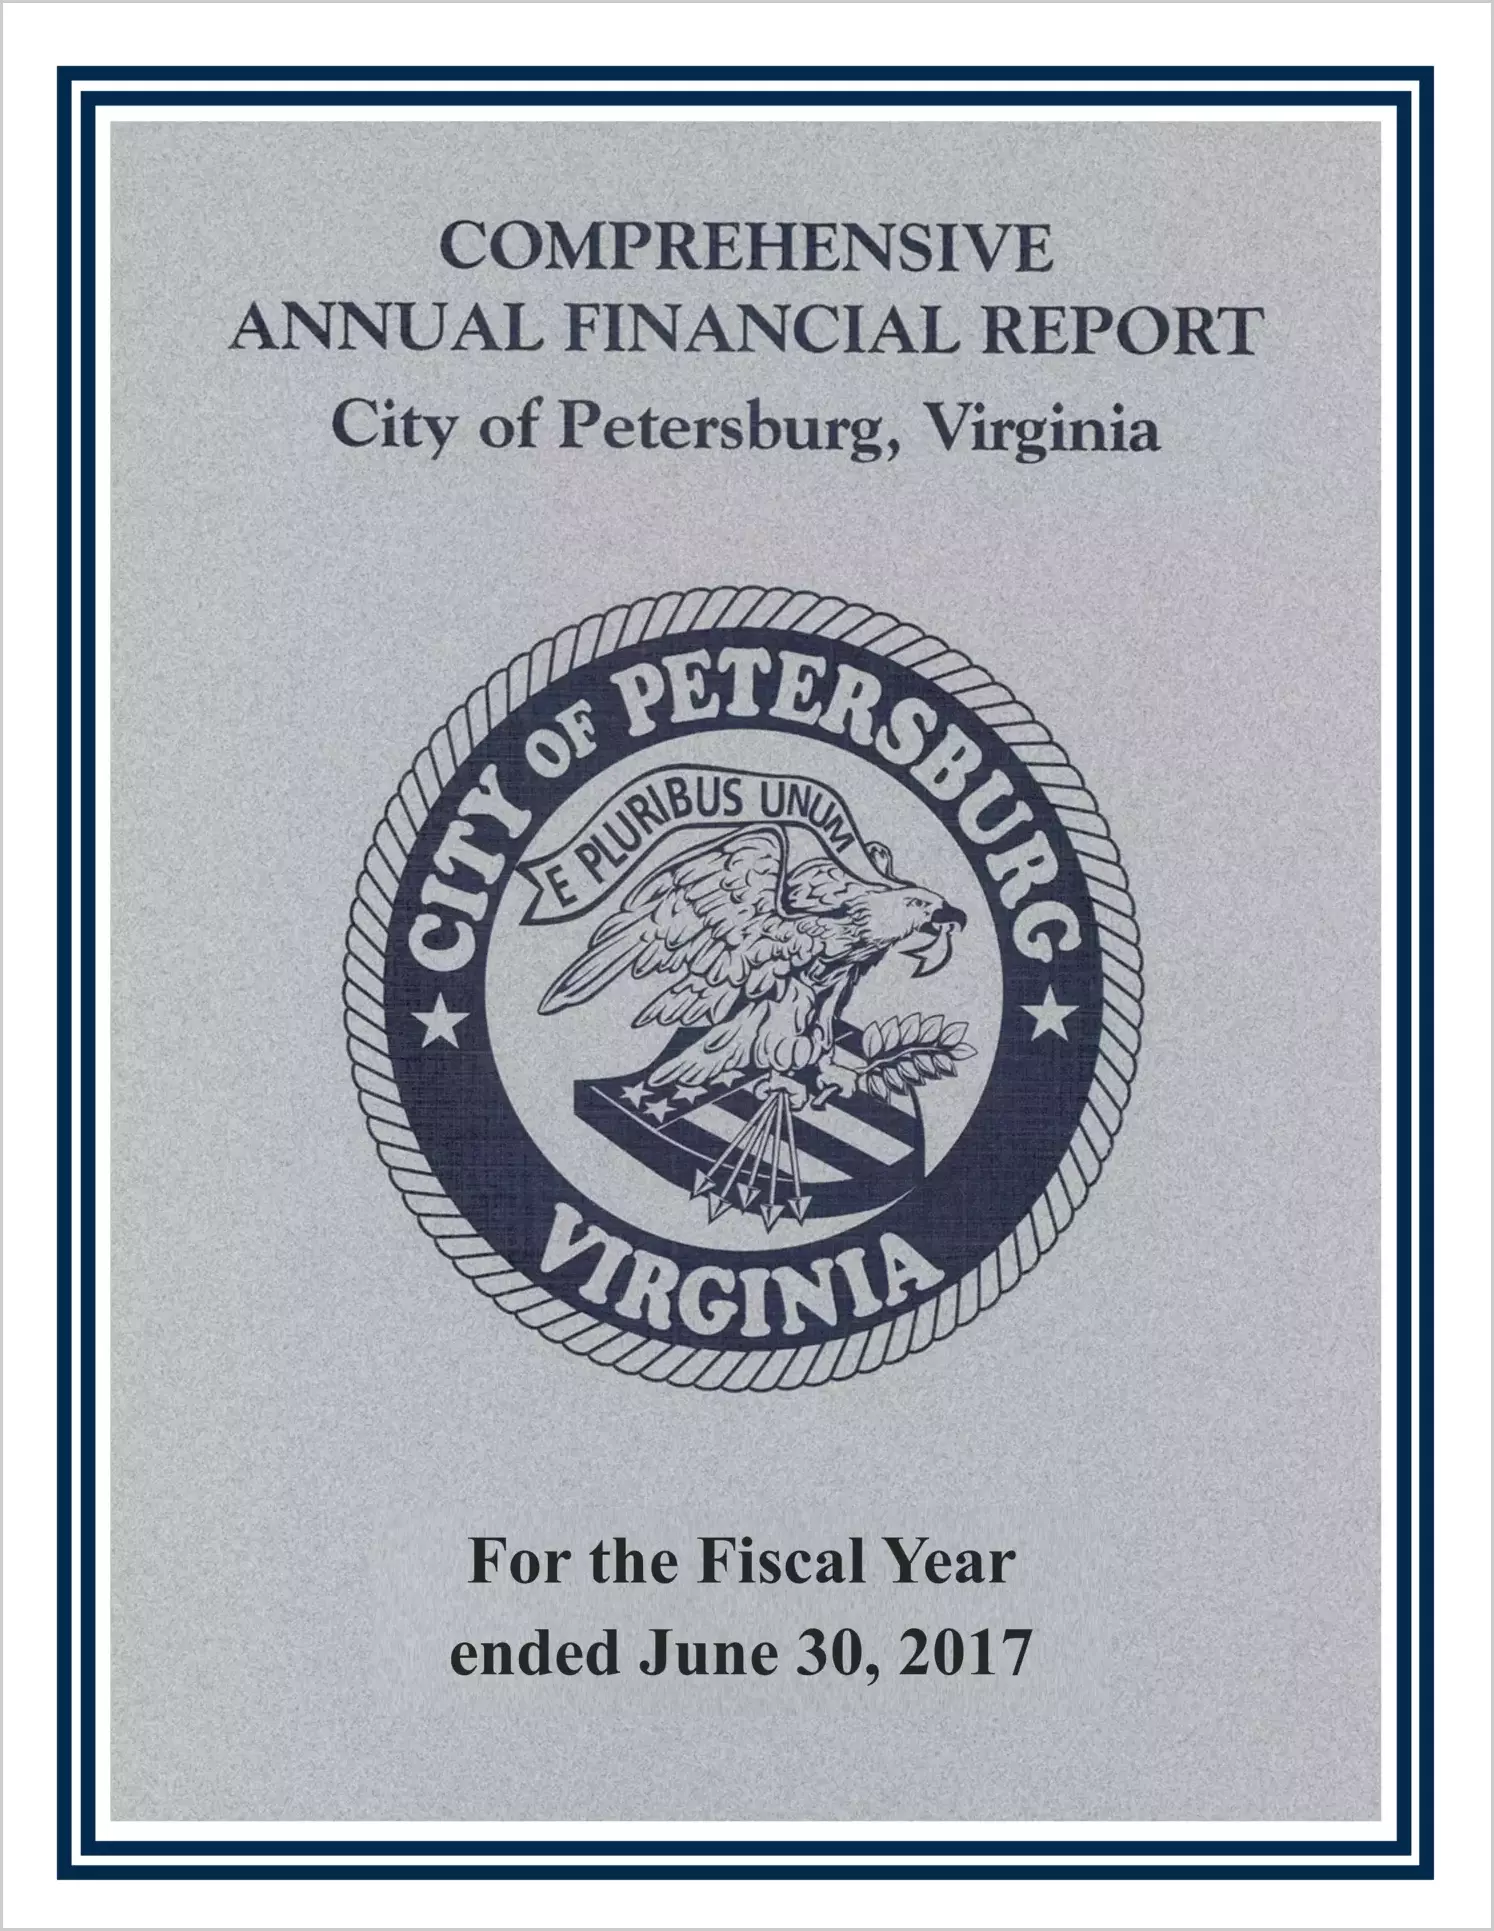 2017 Annual Financial Report for City of Petersburg